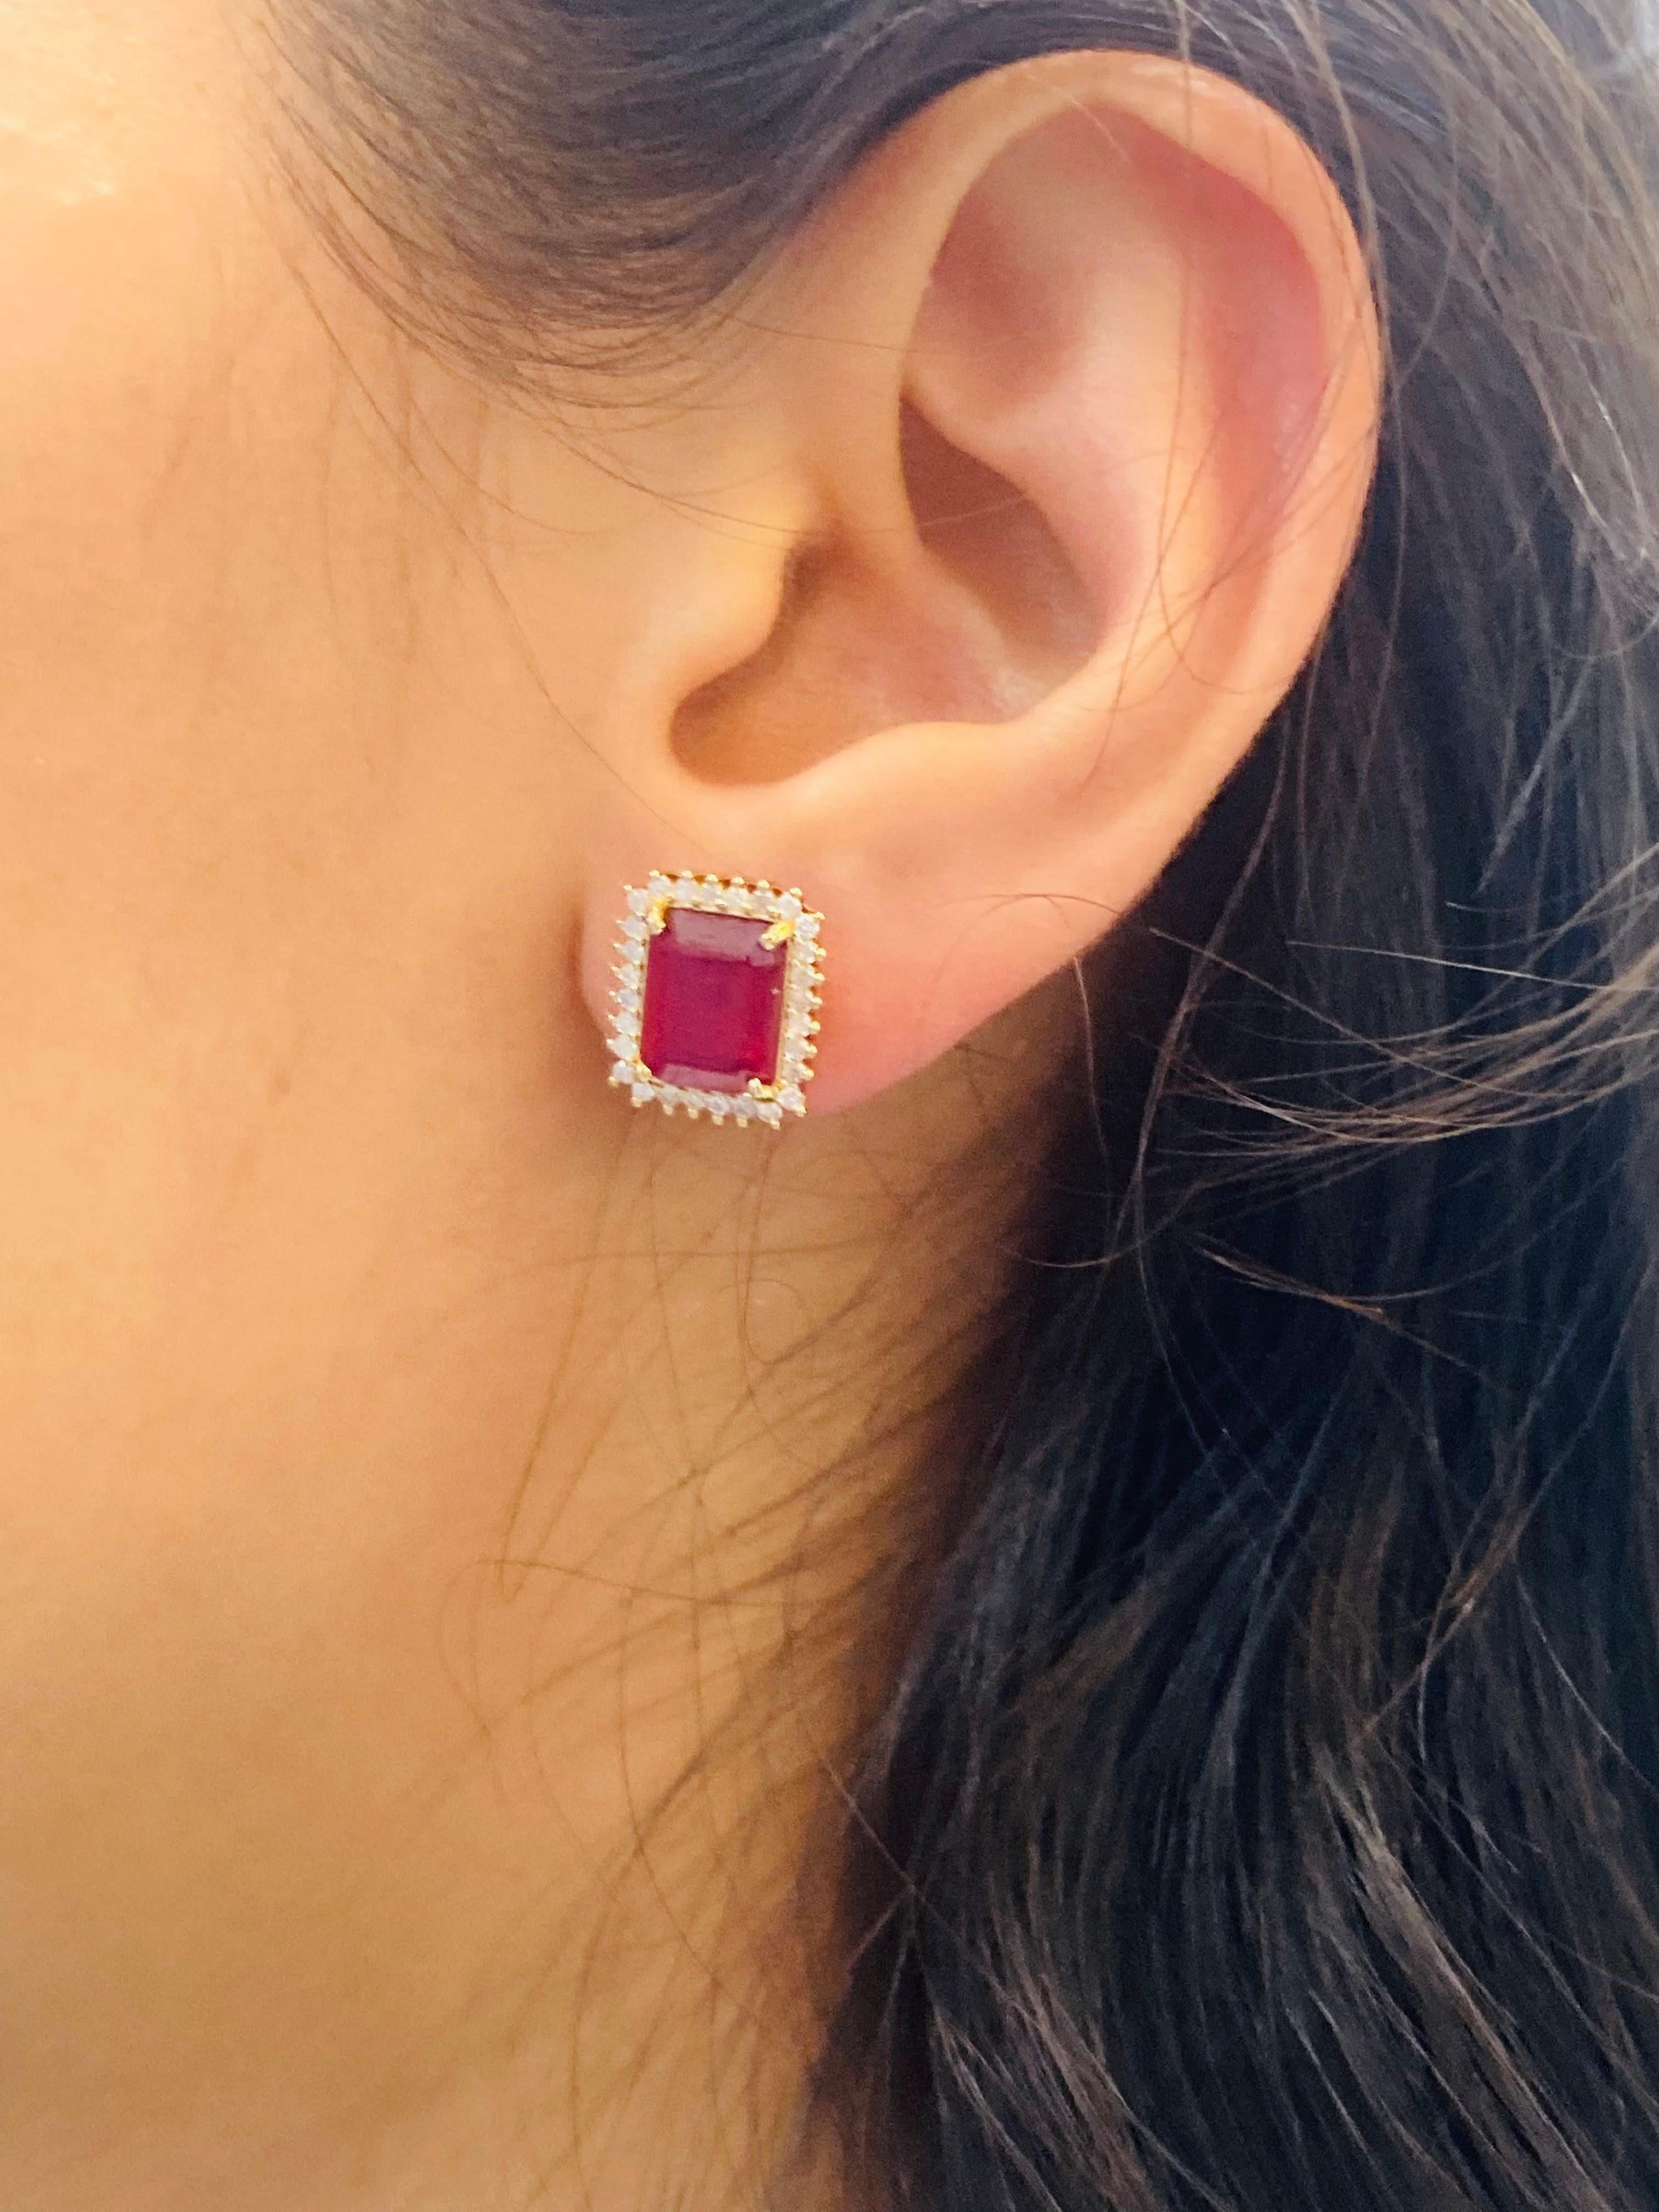 Bochic “Retro Vintage” Diamond & Ruby Retro Set, Earrings & Pendent In 18K Gold 
Natural Red Hot Rubies - 10.60
Diamonds 0.55 Carat 
F color 
VS clarity 
18K Yellow Gold
6.20 Gram

This Pendent and Earrings Set is from the 